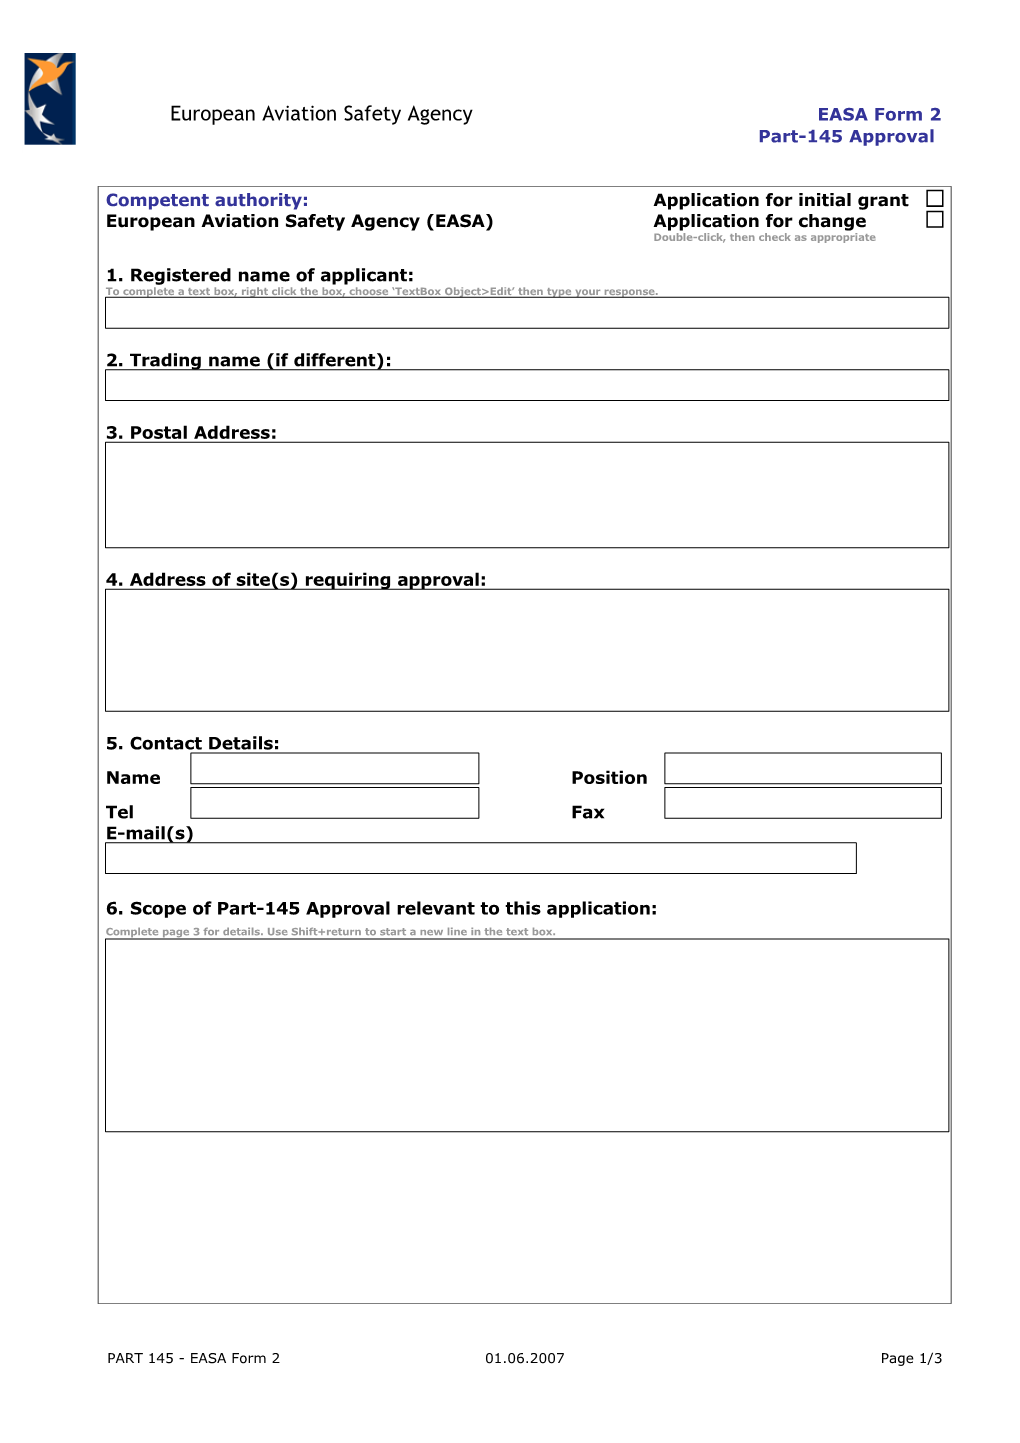 European Aviation Safety Agencyeasa Form 2Part-145 Approval